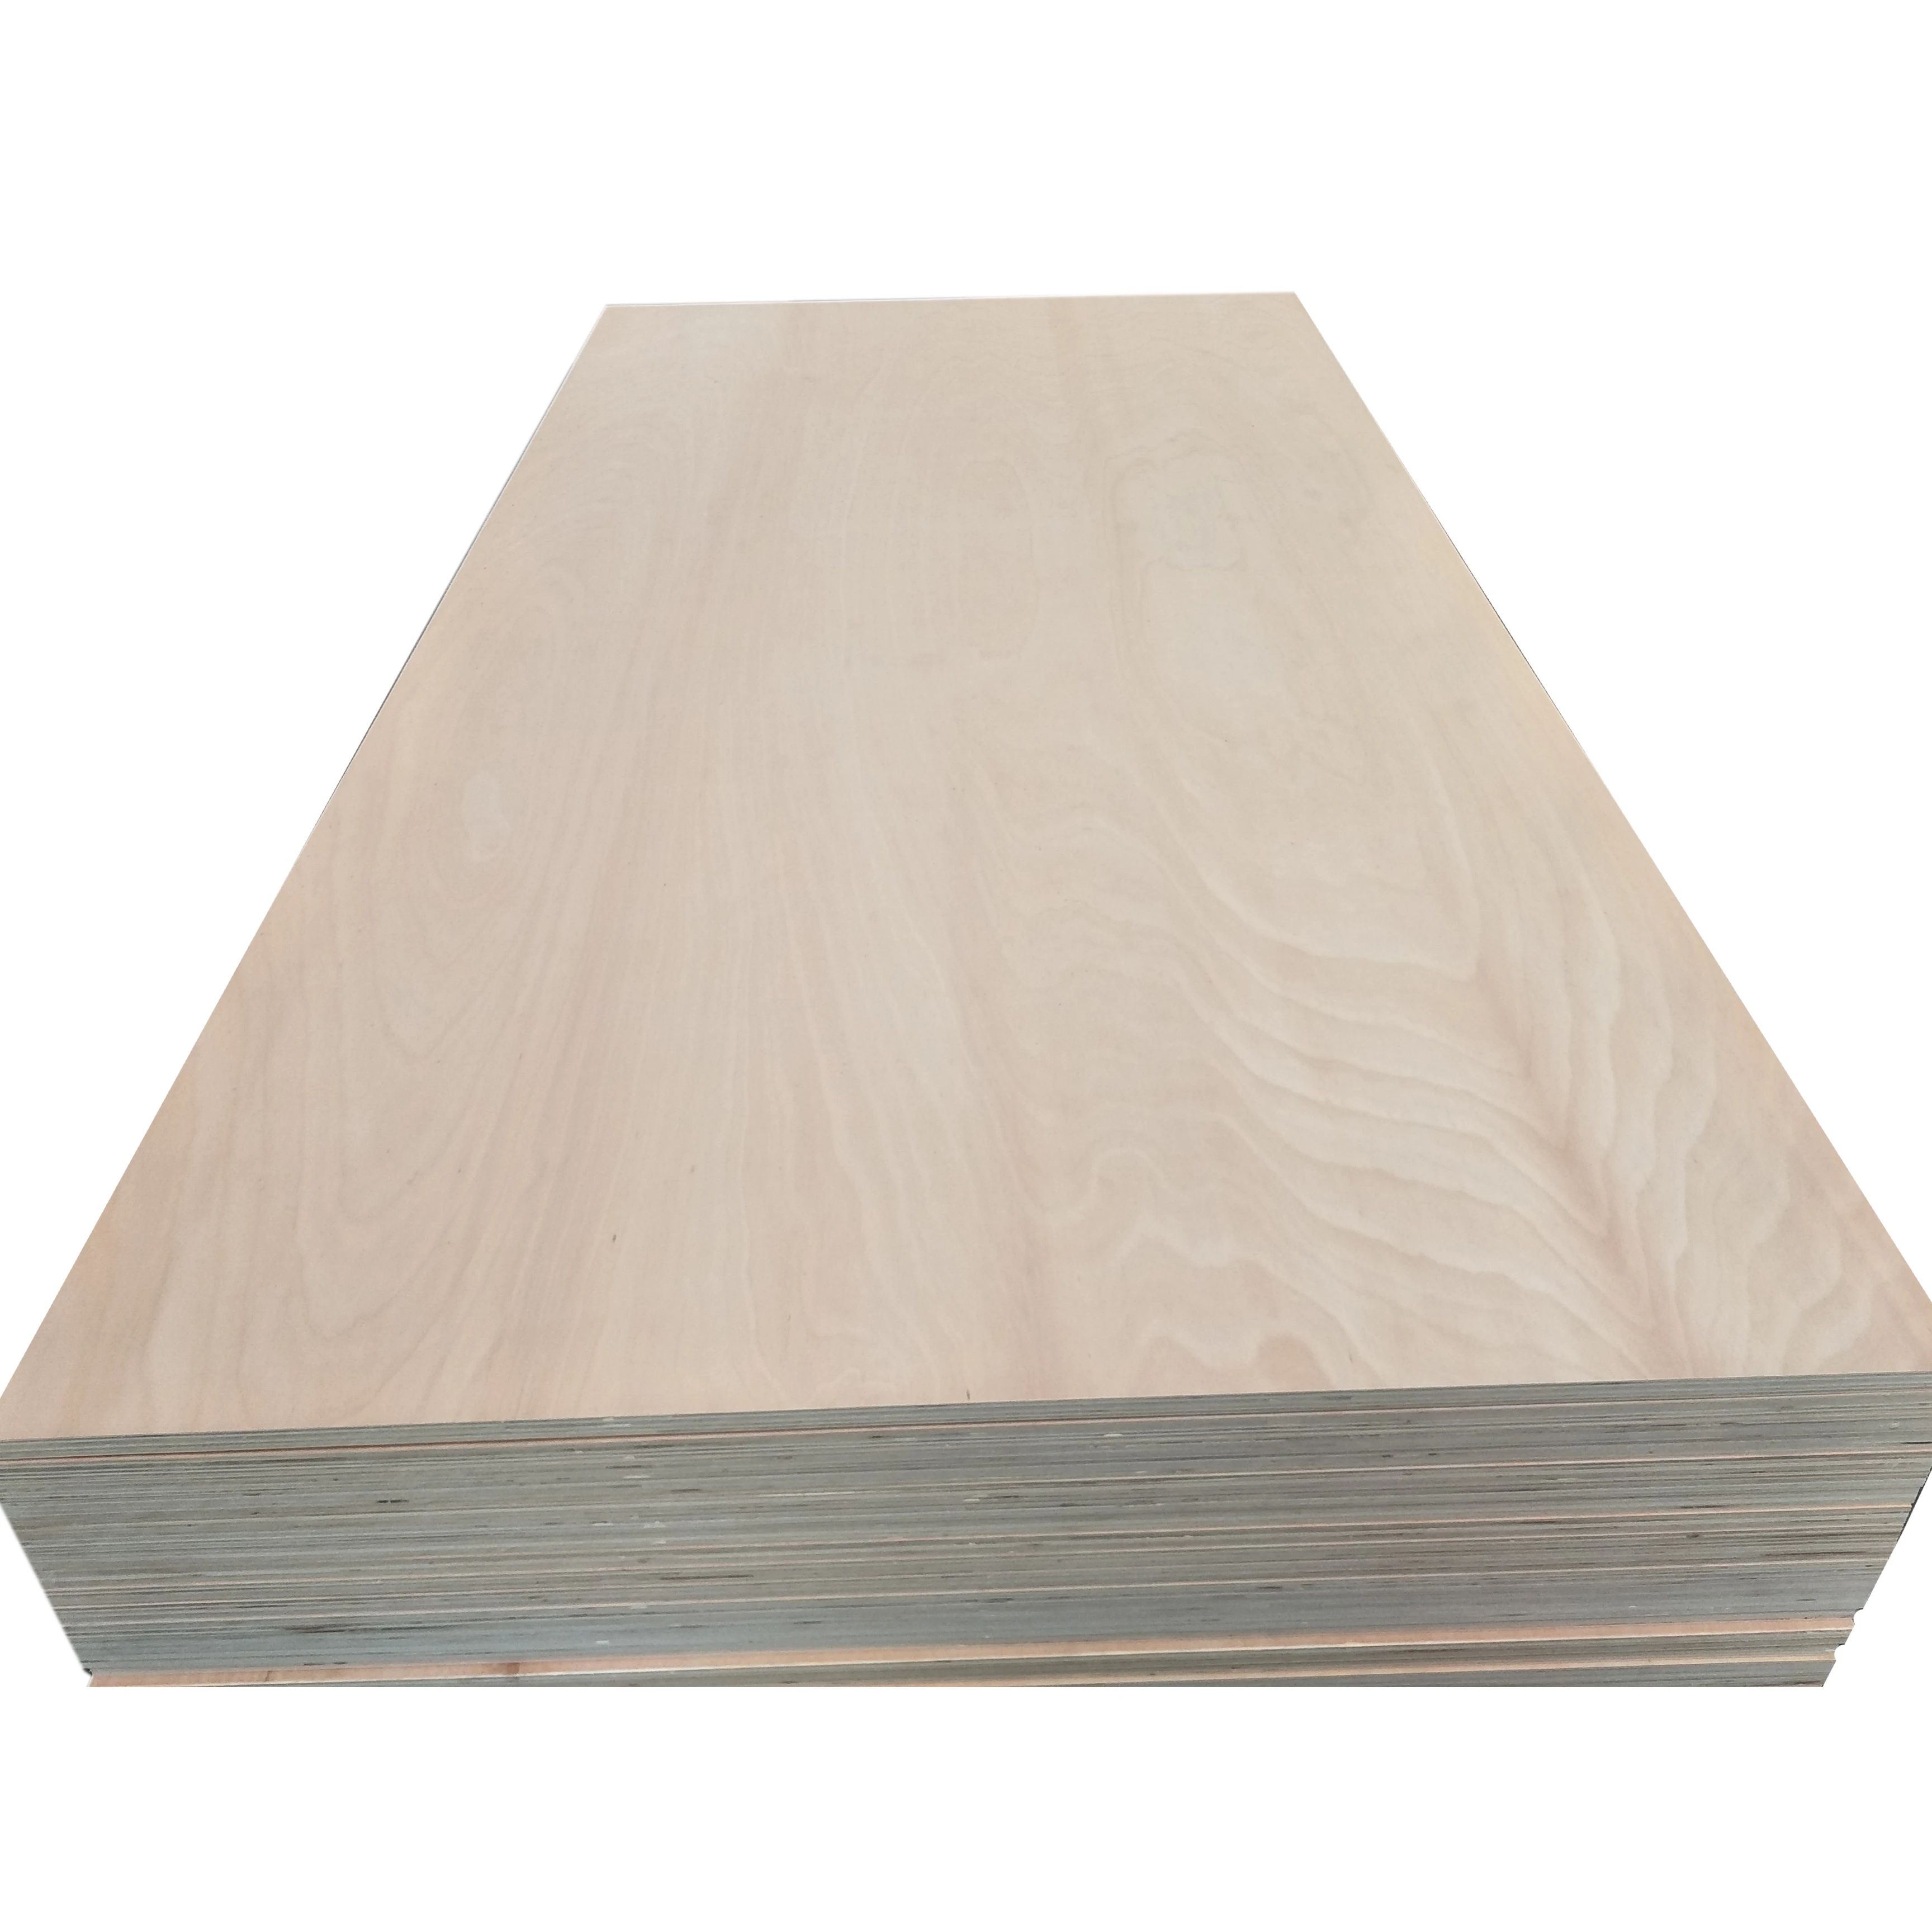 oem cdx eucalyptus pine birch okoume 3mm 12mm 15mm 16mm 18mm laminated China furniture commercial plywoods board sheet for sale